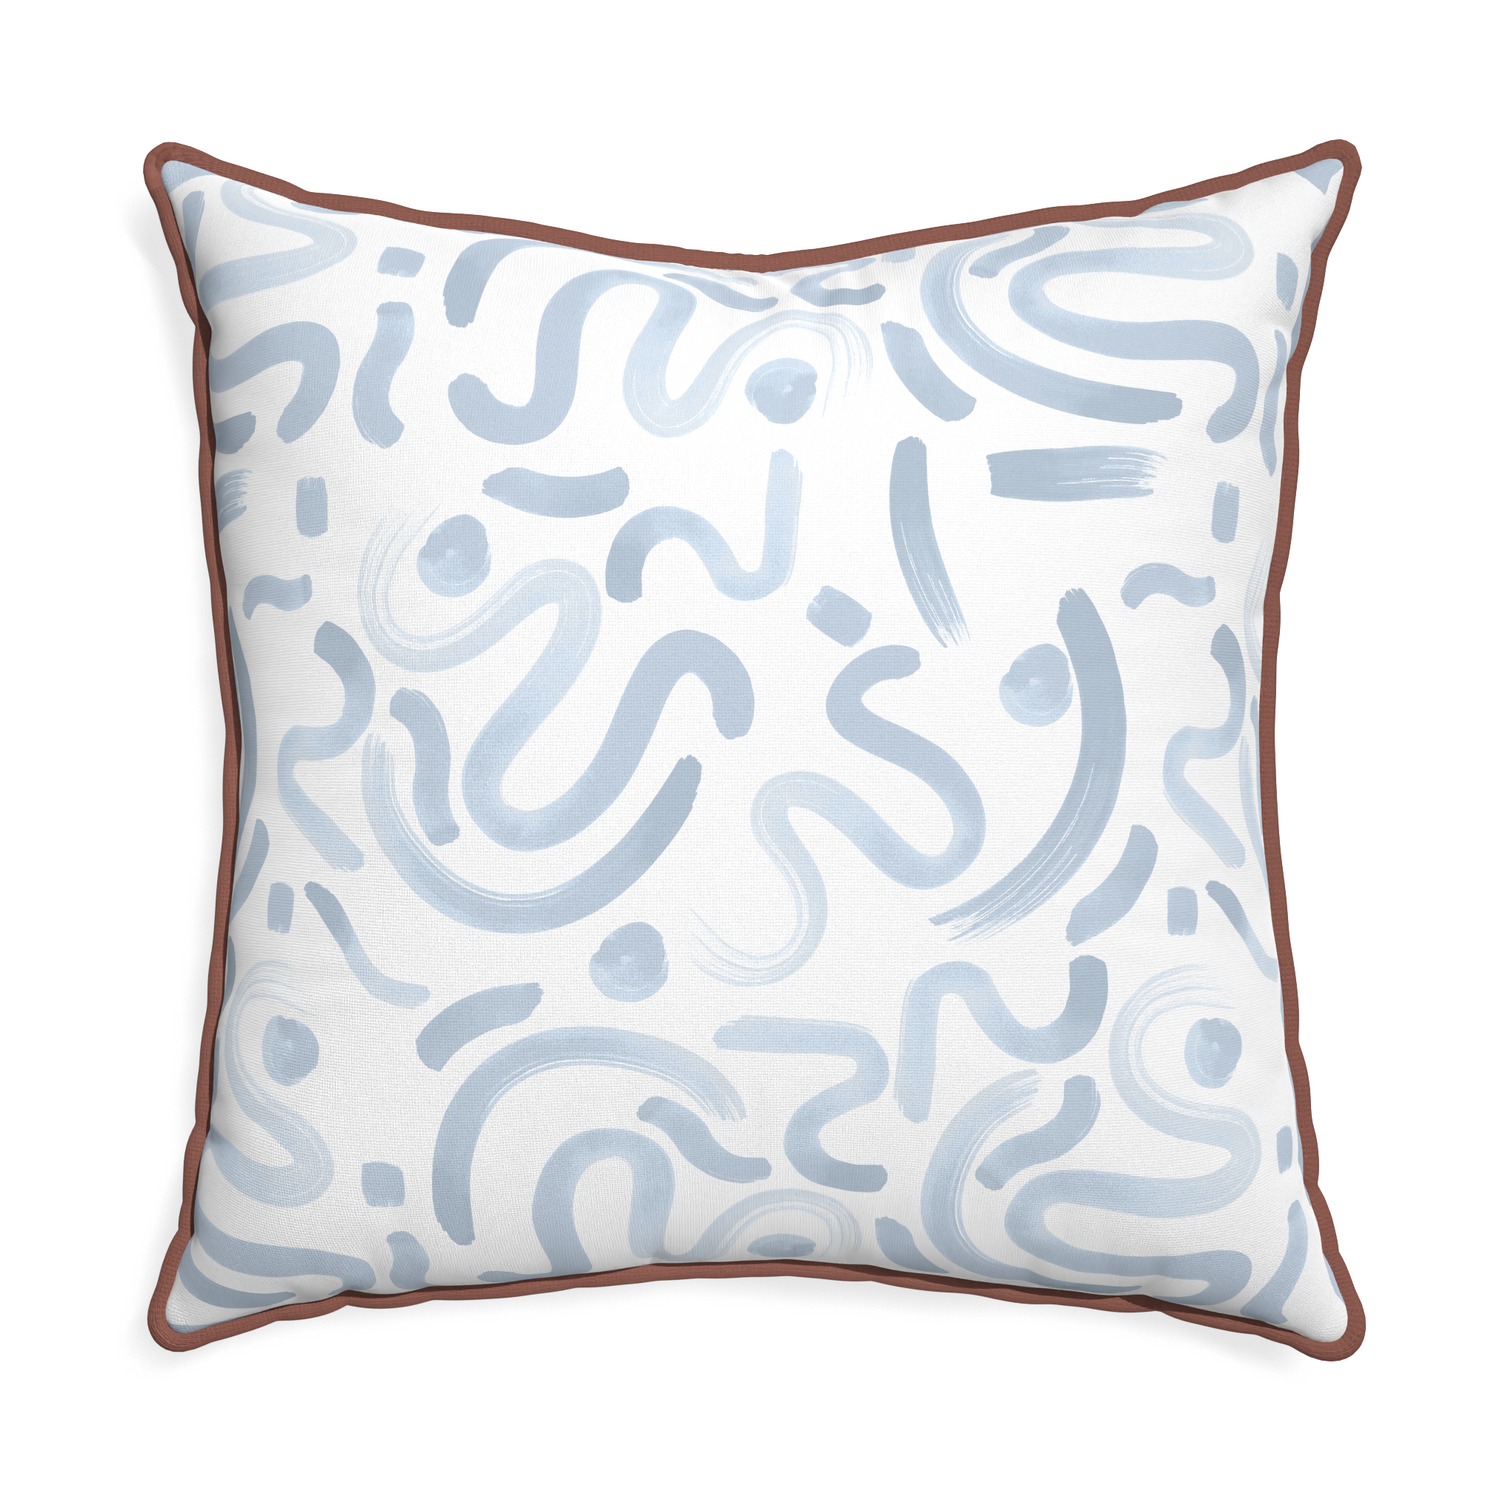 Euro-sham hockney sky custom pillow with w piping on white background